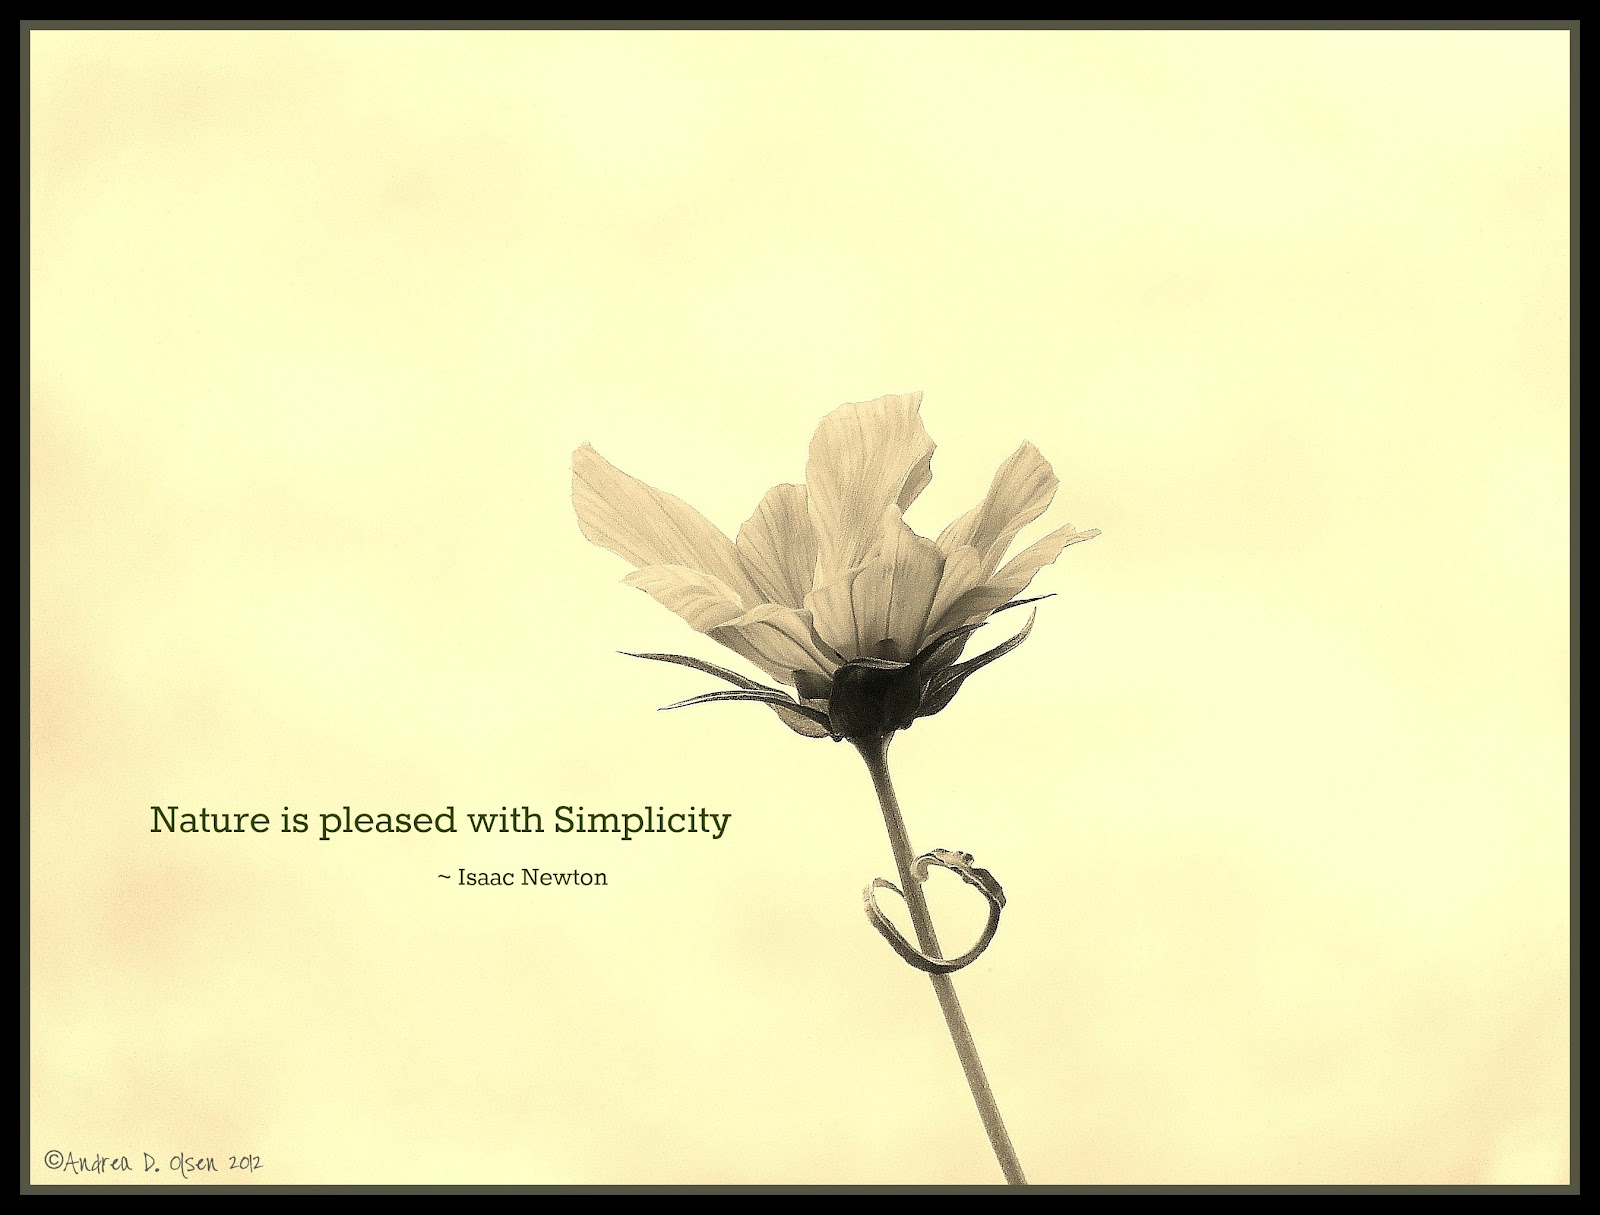 I hope you enjoy the following photos and quotes on simplicity